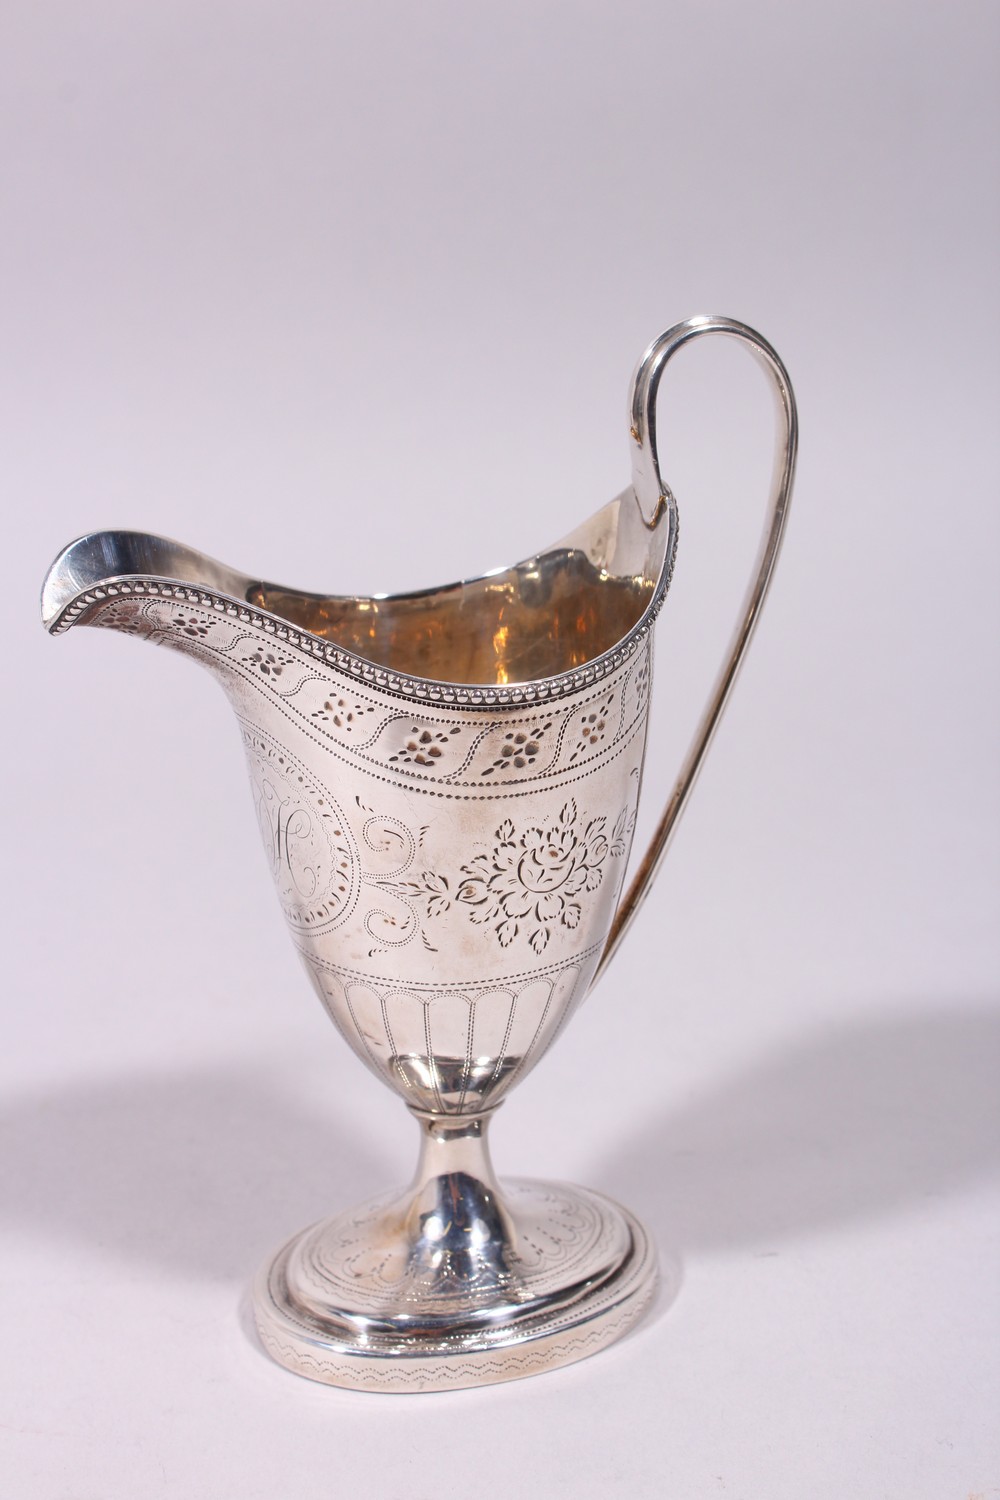 A GOOD GEORGE III ENGRAVED HELMET SHAPED MILK JUG, with reeded handle and base. London 1782. - Image 4 of 9